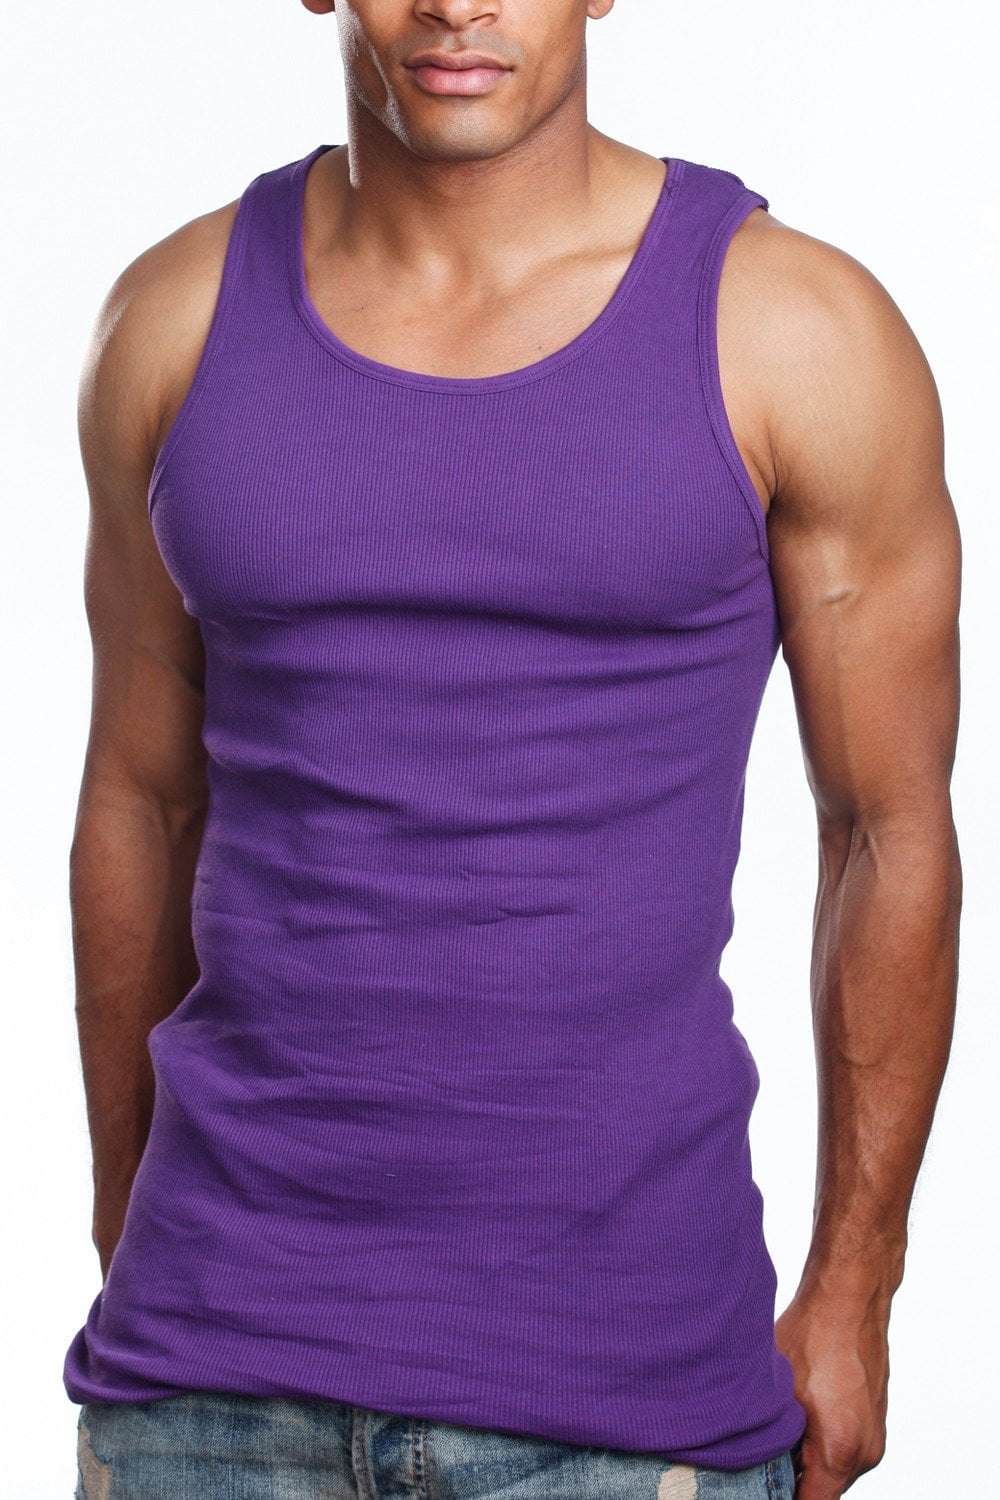 apparel99-men-s-6-pack-tank-top-a-shirt-100-cotton-ribbed-undershirts-multicolor-sleeveless